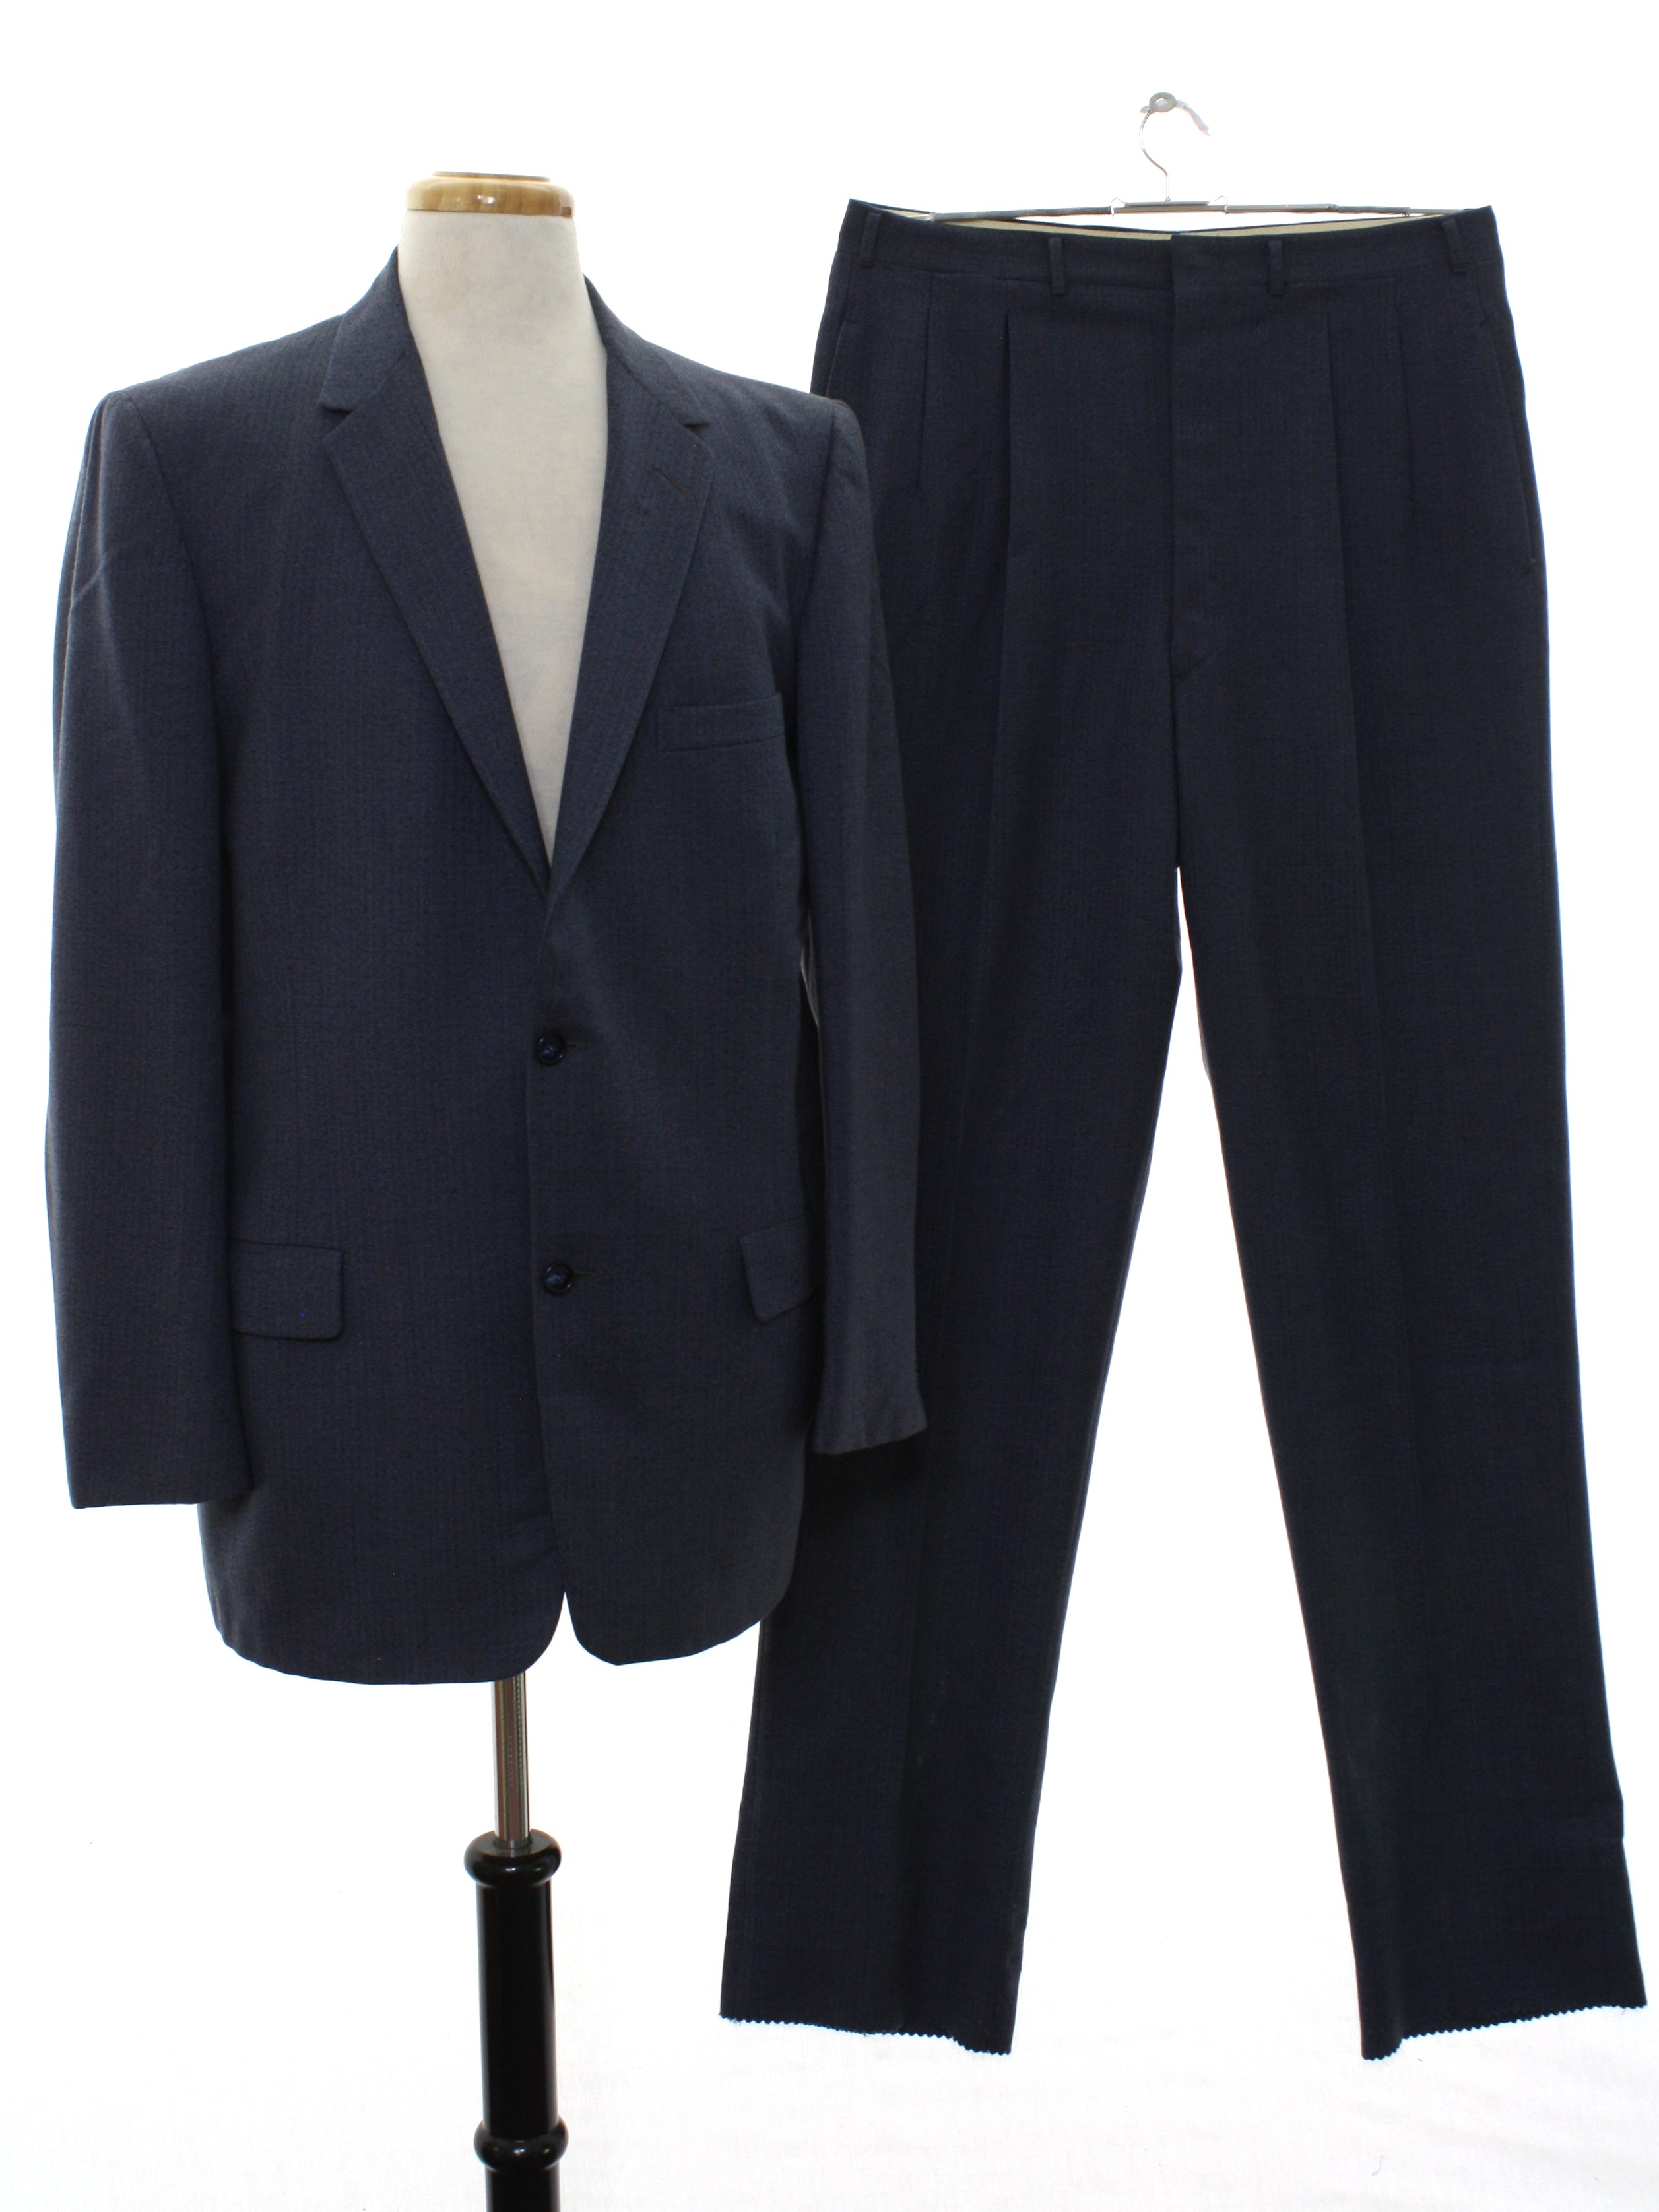 1950's Suit (Town Clad for Penneys): Late 50s or Early 60s -Town Clad ...